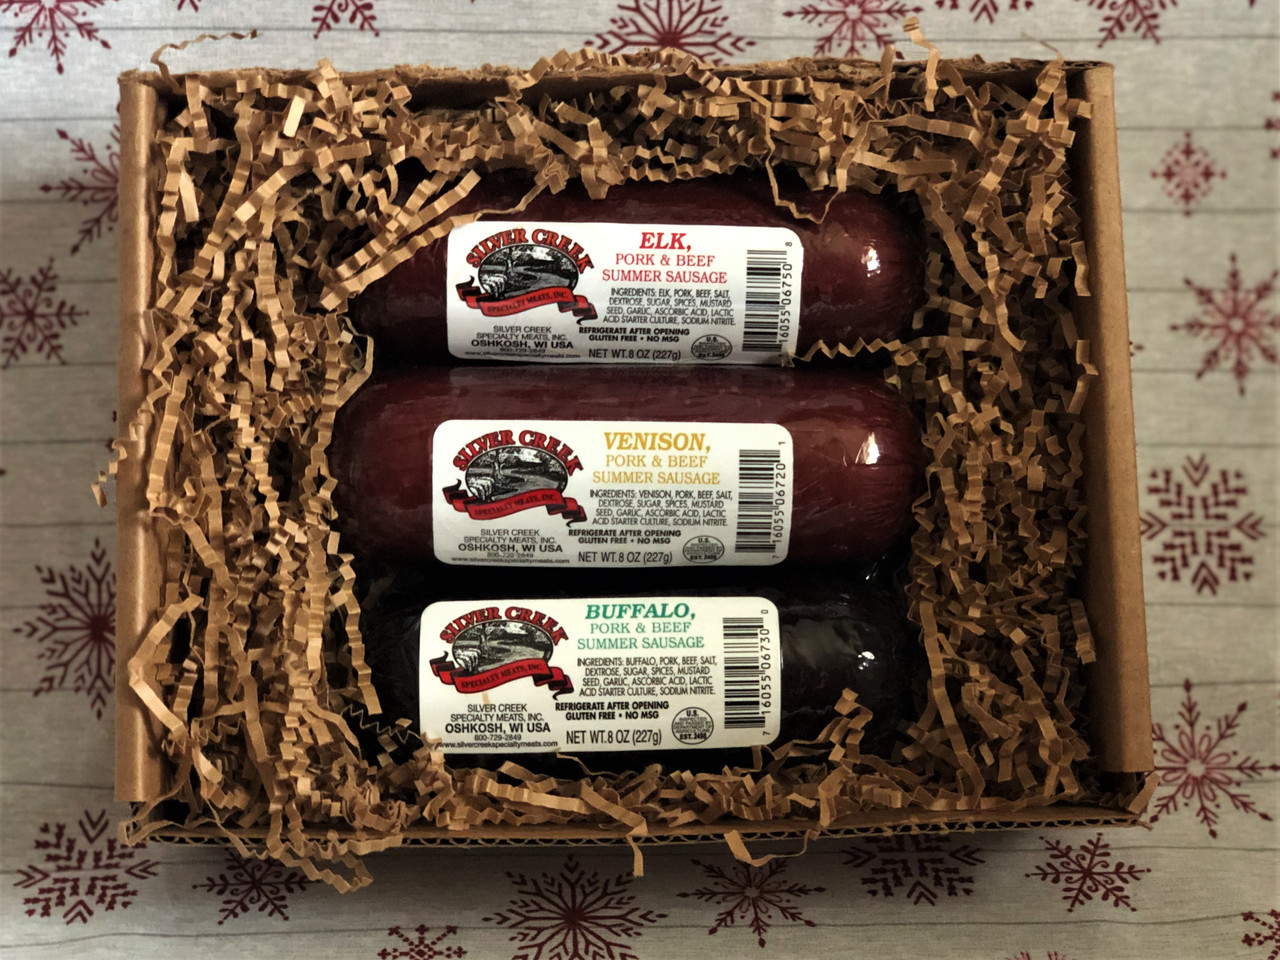 Silver Creek Wild Game Summer Sausage Sampler
Elk, Venison & Buffalo all in an 8 oz size - perfect cracker toppers!